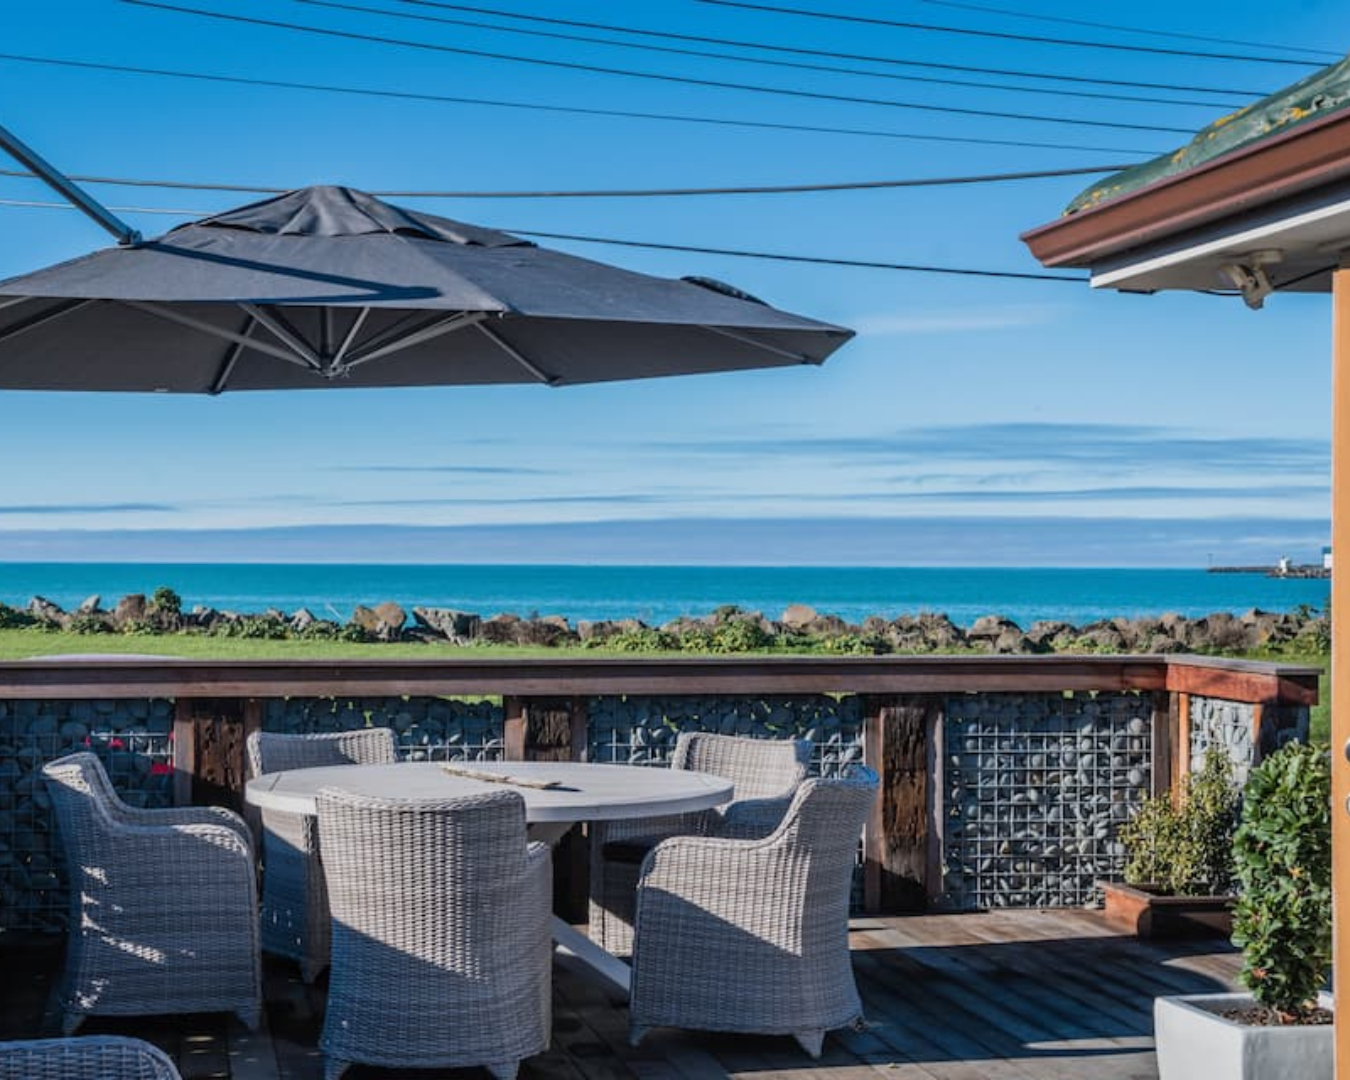 Bright blue ocean and sky are the view from the outdoor dining space at this beach bungalow in Timaru